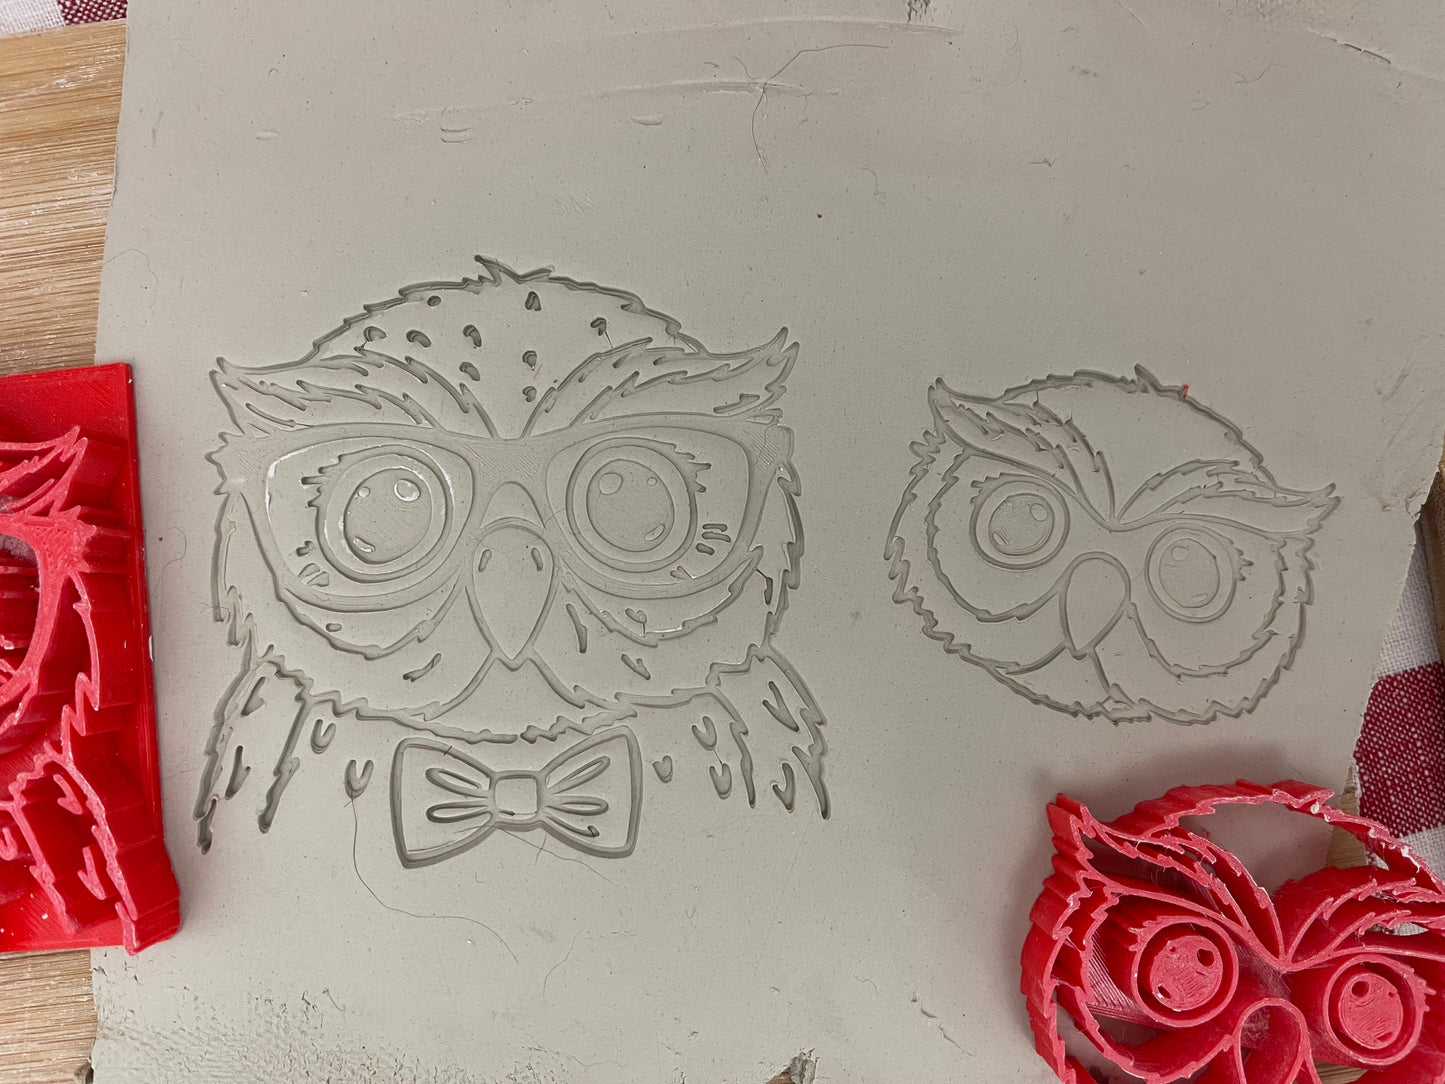 Pottery Stamp, Owl face with glasses or plain design - multiple sizes